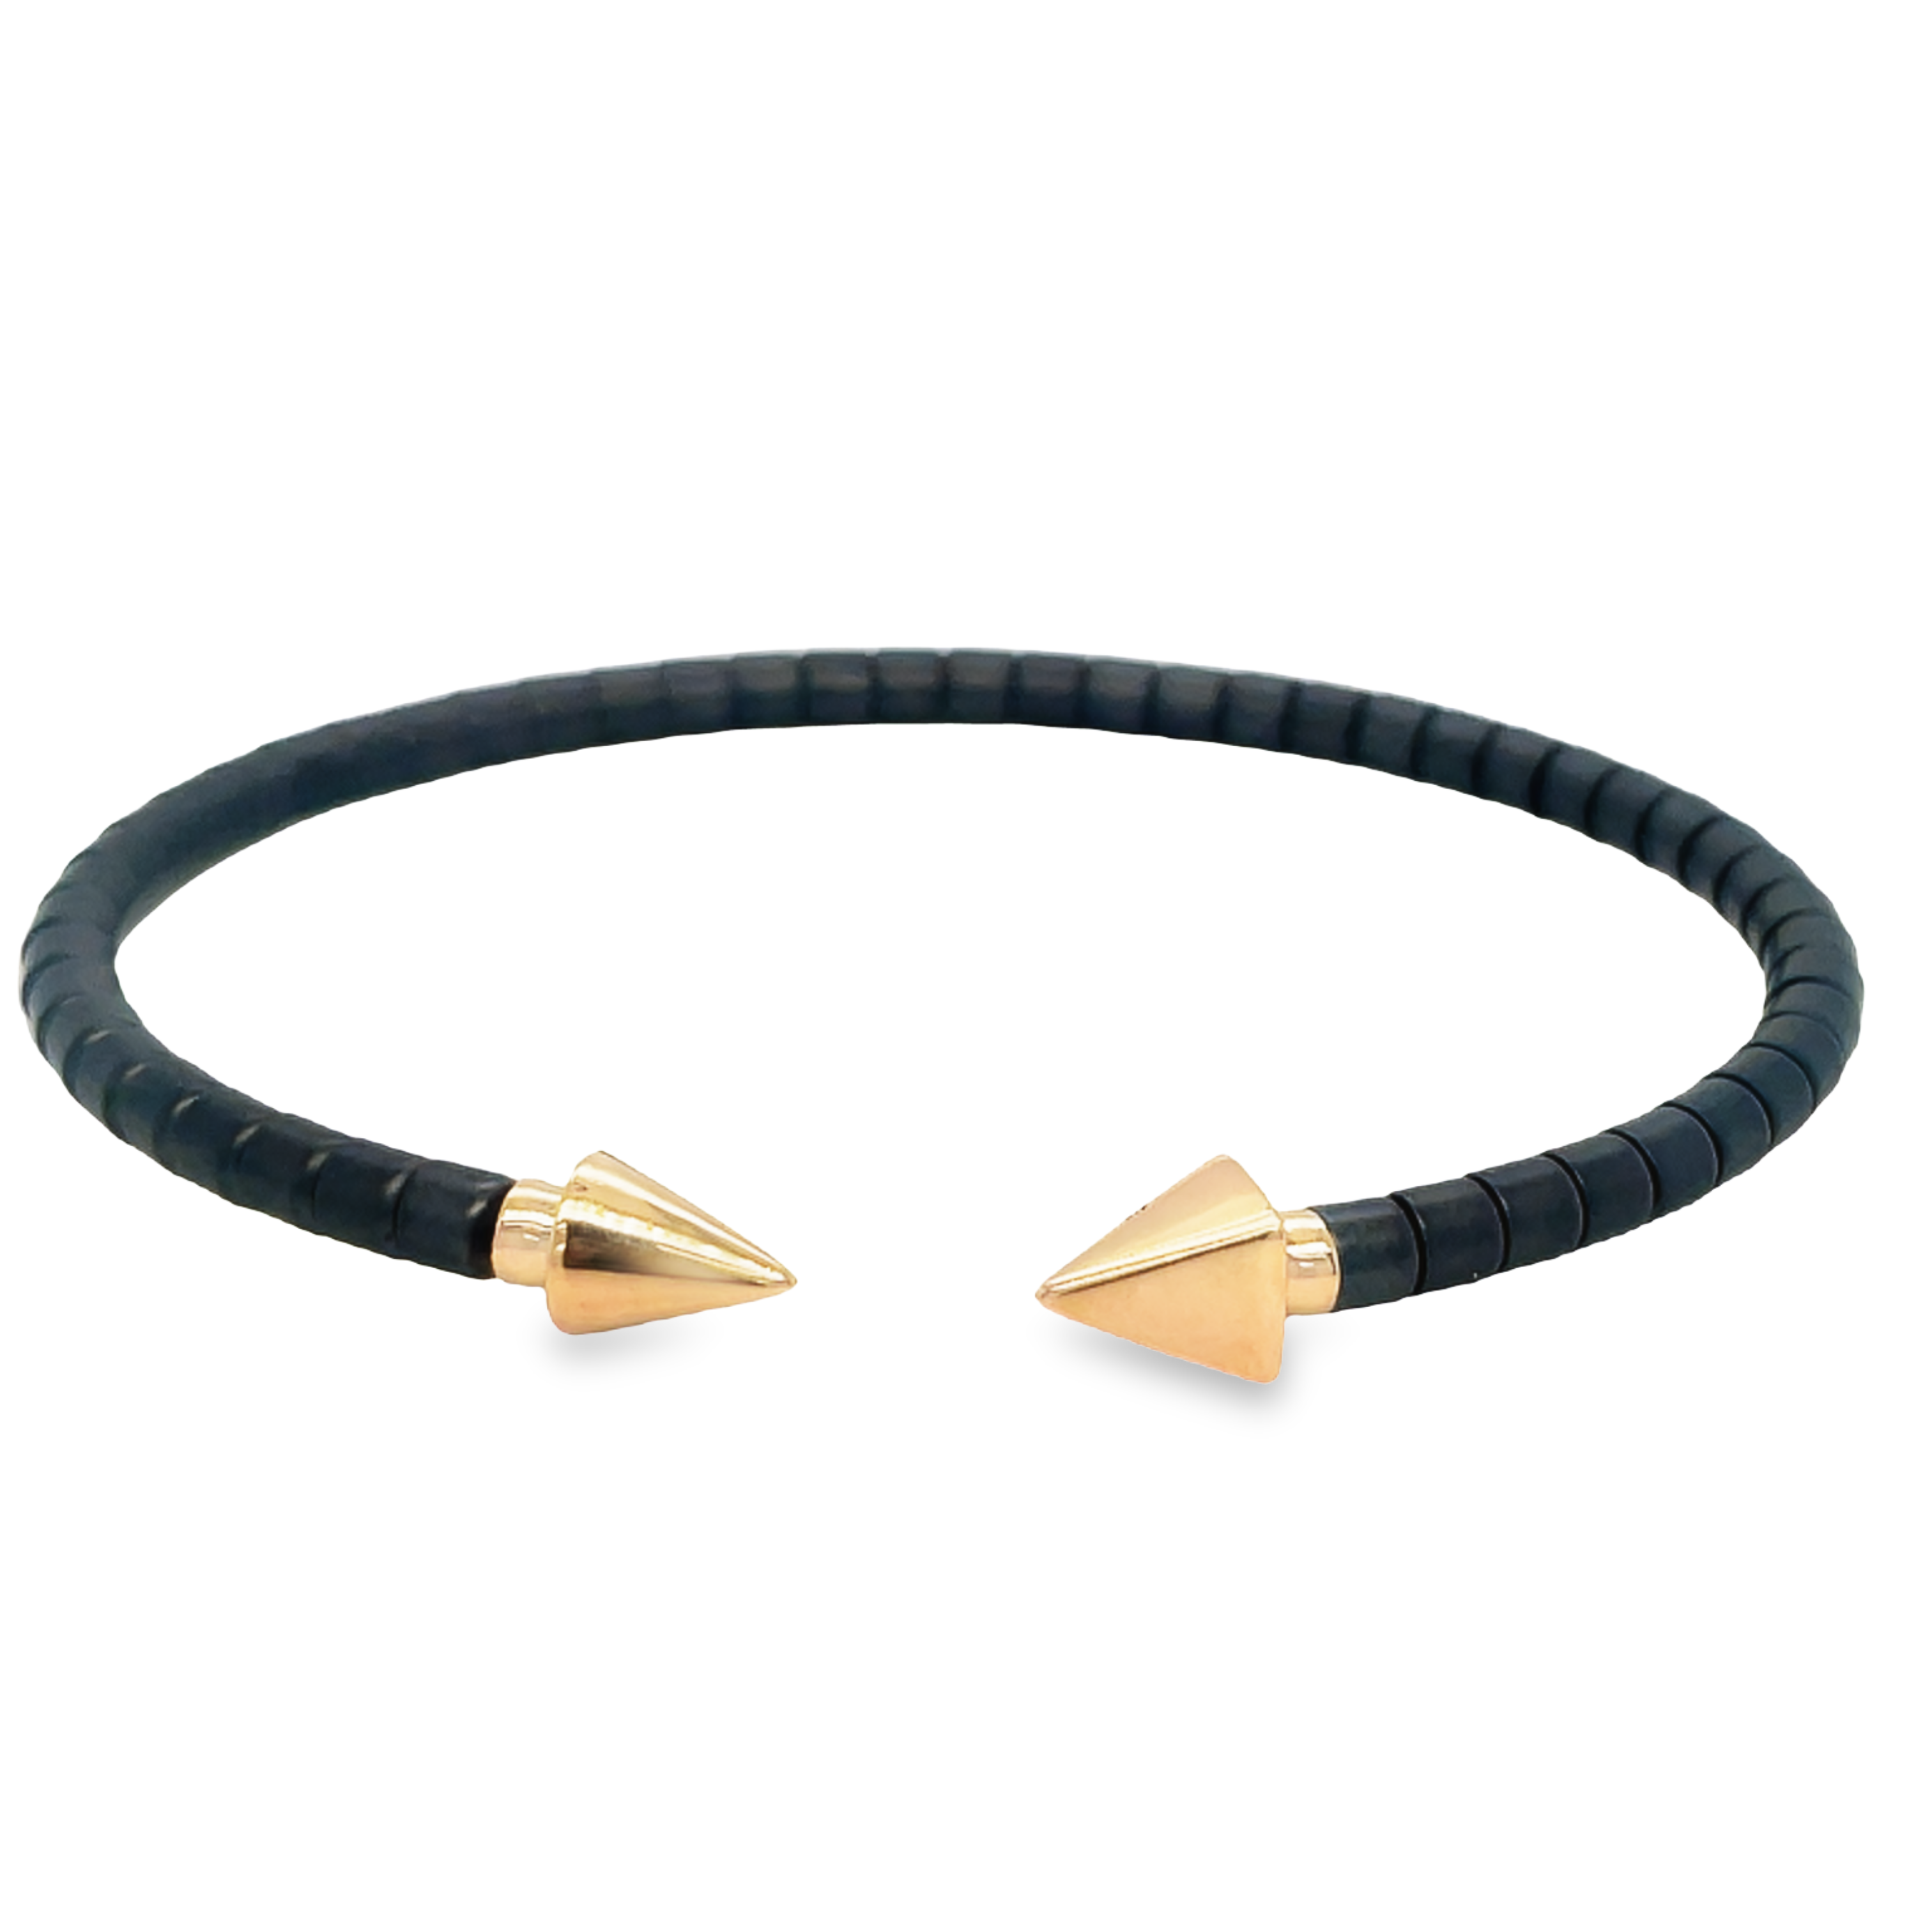 This Mens 18K Rose Gold Flexible Ceramic Bracelet is a perfect addition to any look. It features an elegant spear style design, made of luxurious 18k rose gold with flexible ceramic bangle. Crafted in Italy with the highest quality materials, this bracelet will stand the test of time.